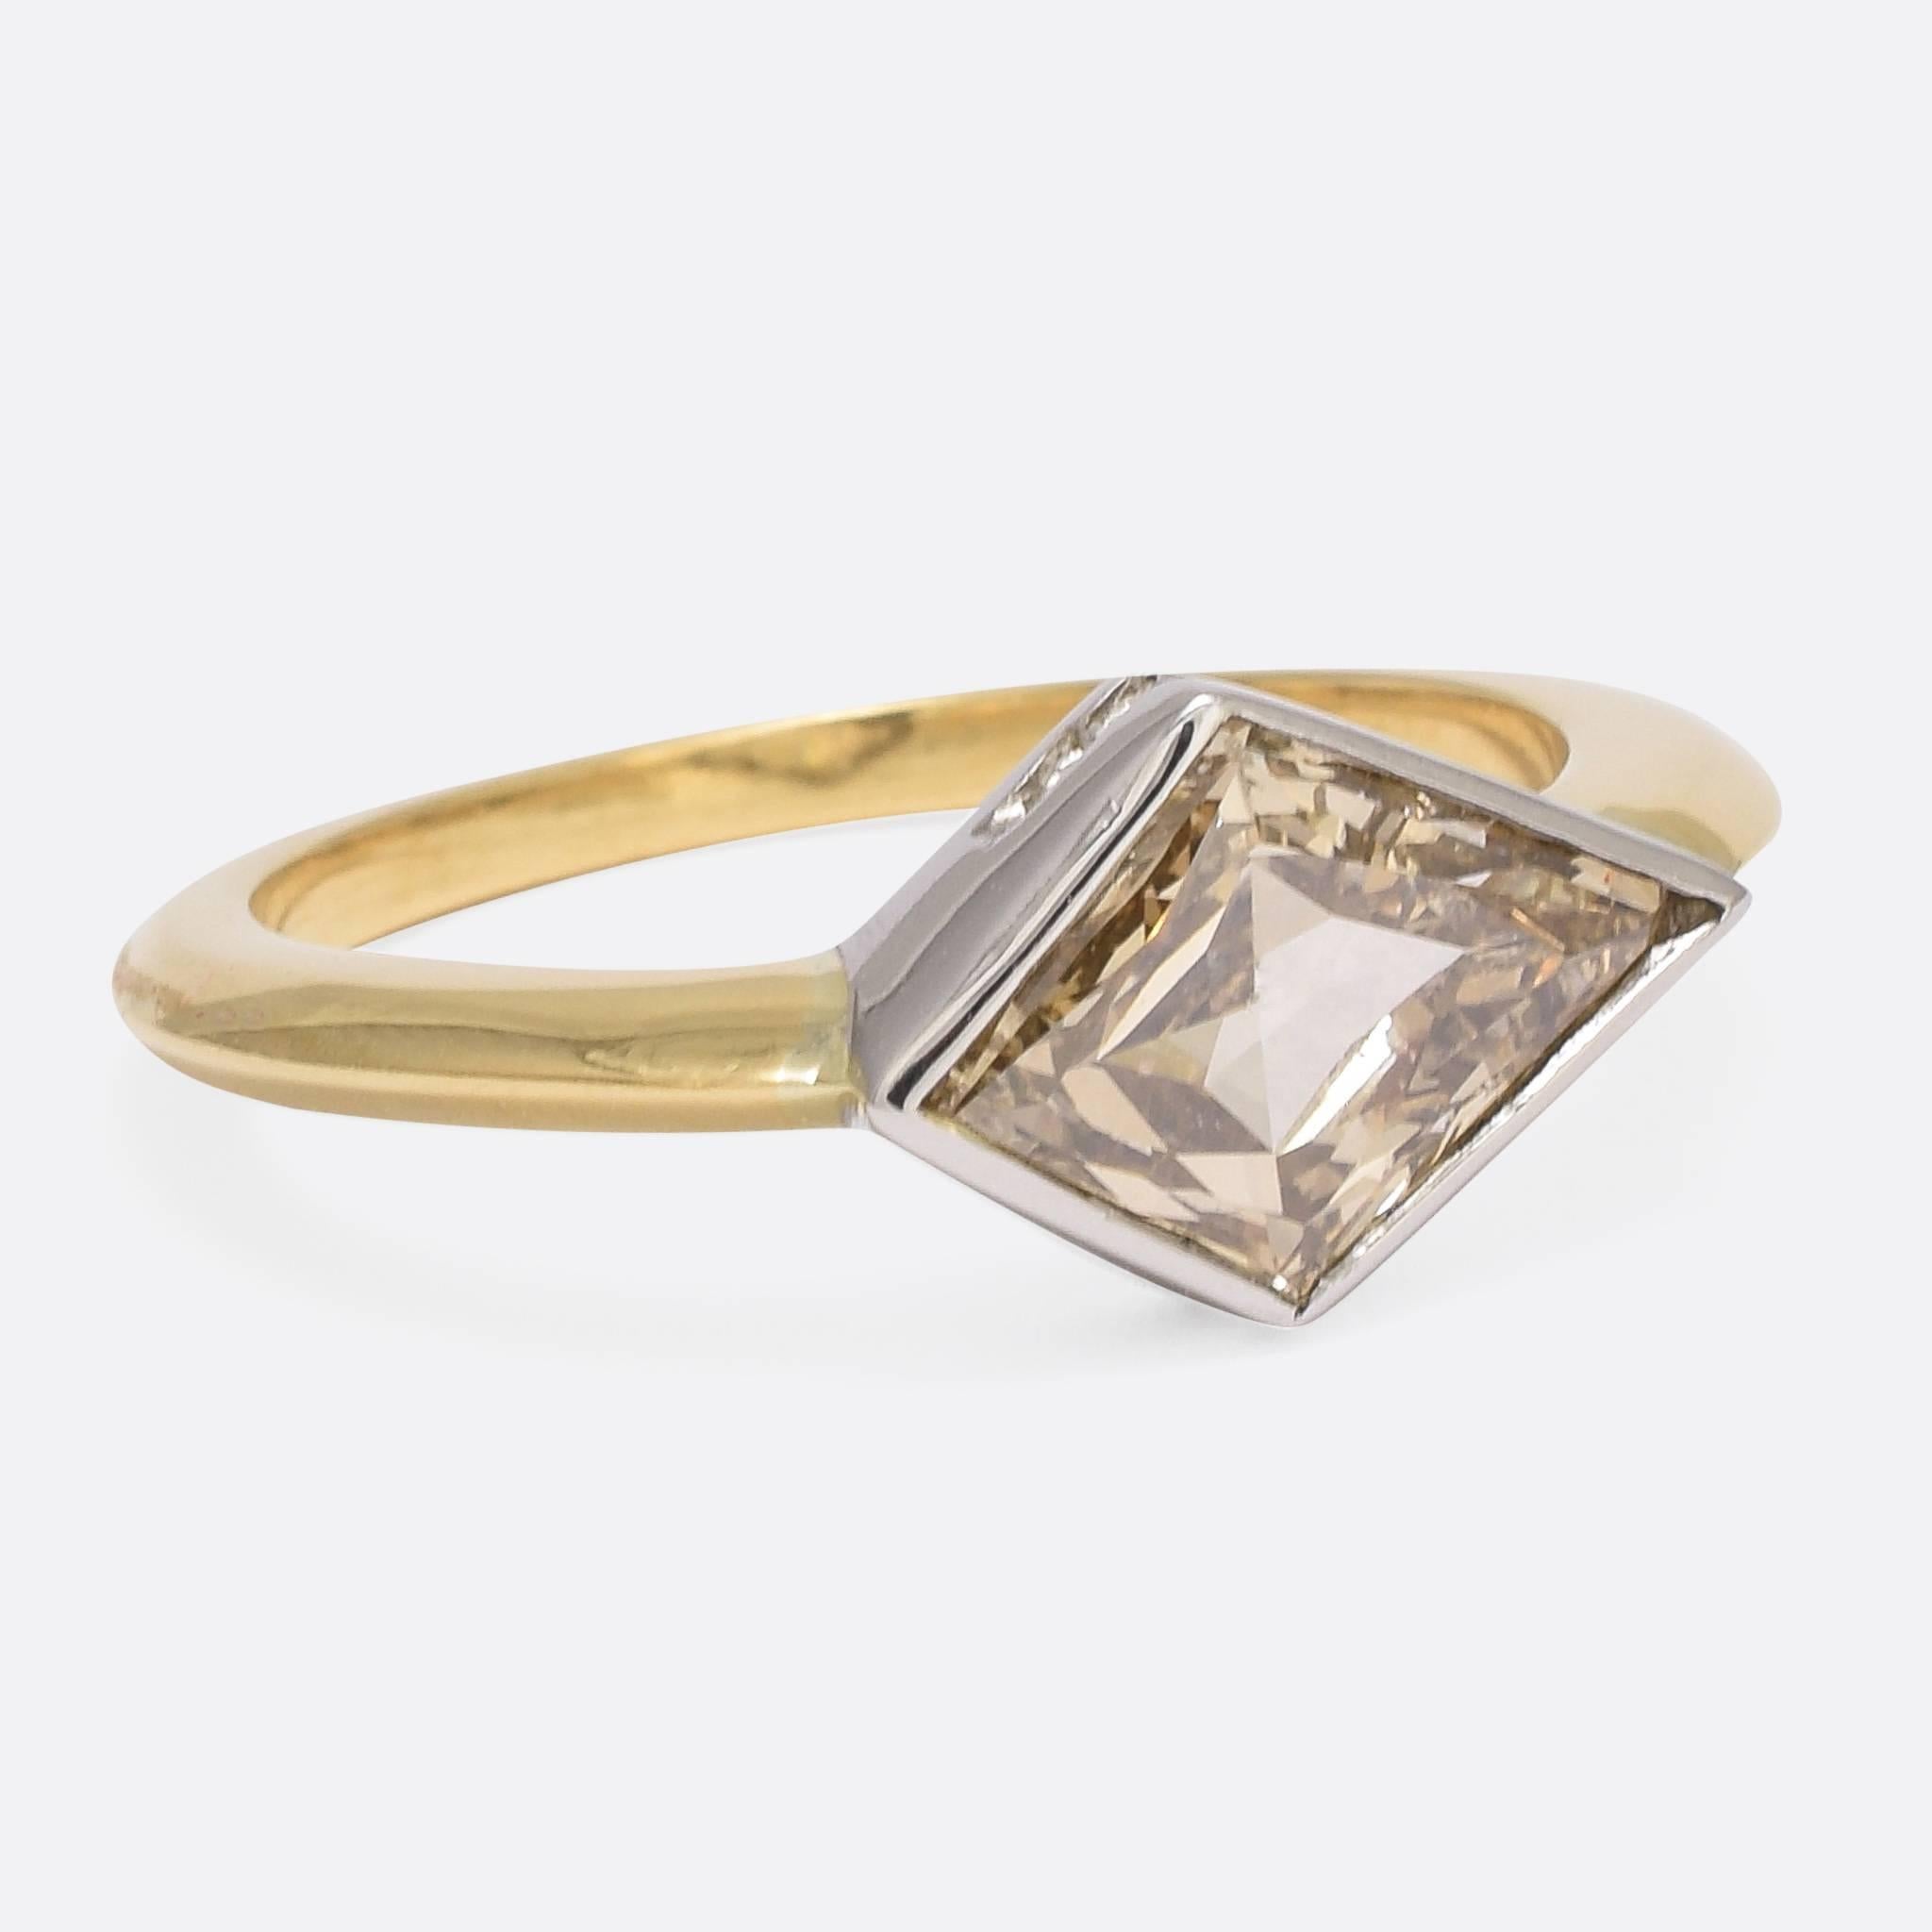 We have set a superb kite shaped diamond in a contemporary ring mount of our own design. The knife-edge band is modelled in recycled 18ct yellow gold, and the 1.91ct stone lies in a simple platinum collet setting. The diamond has a beautiful